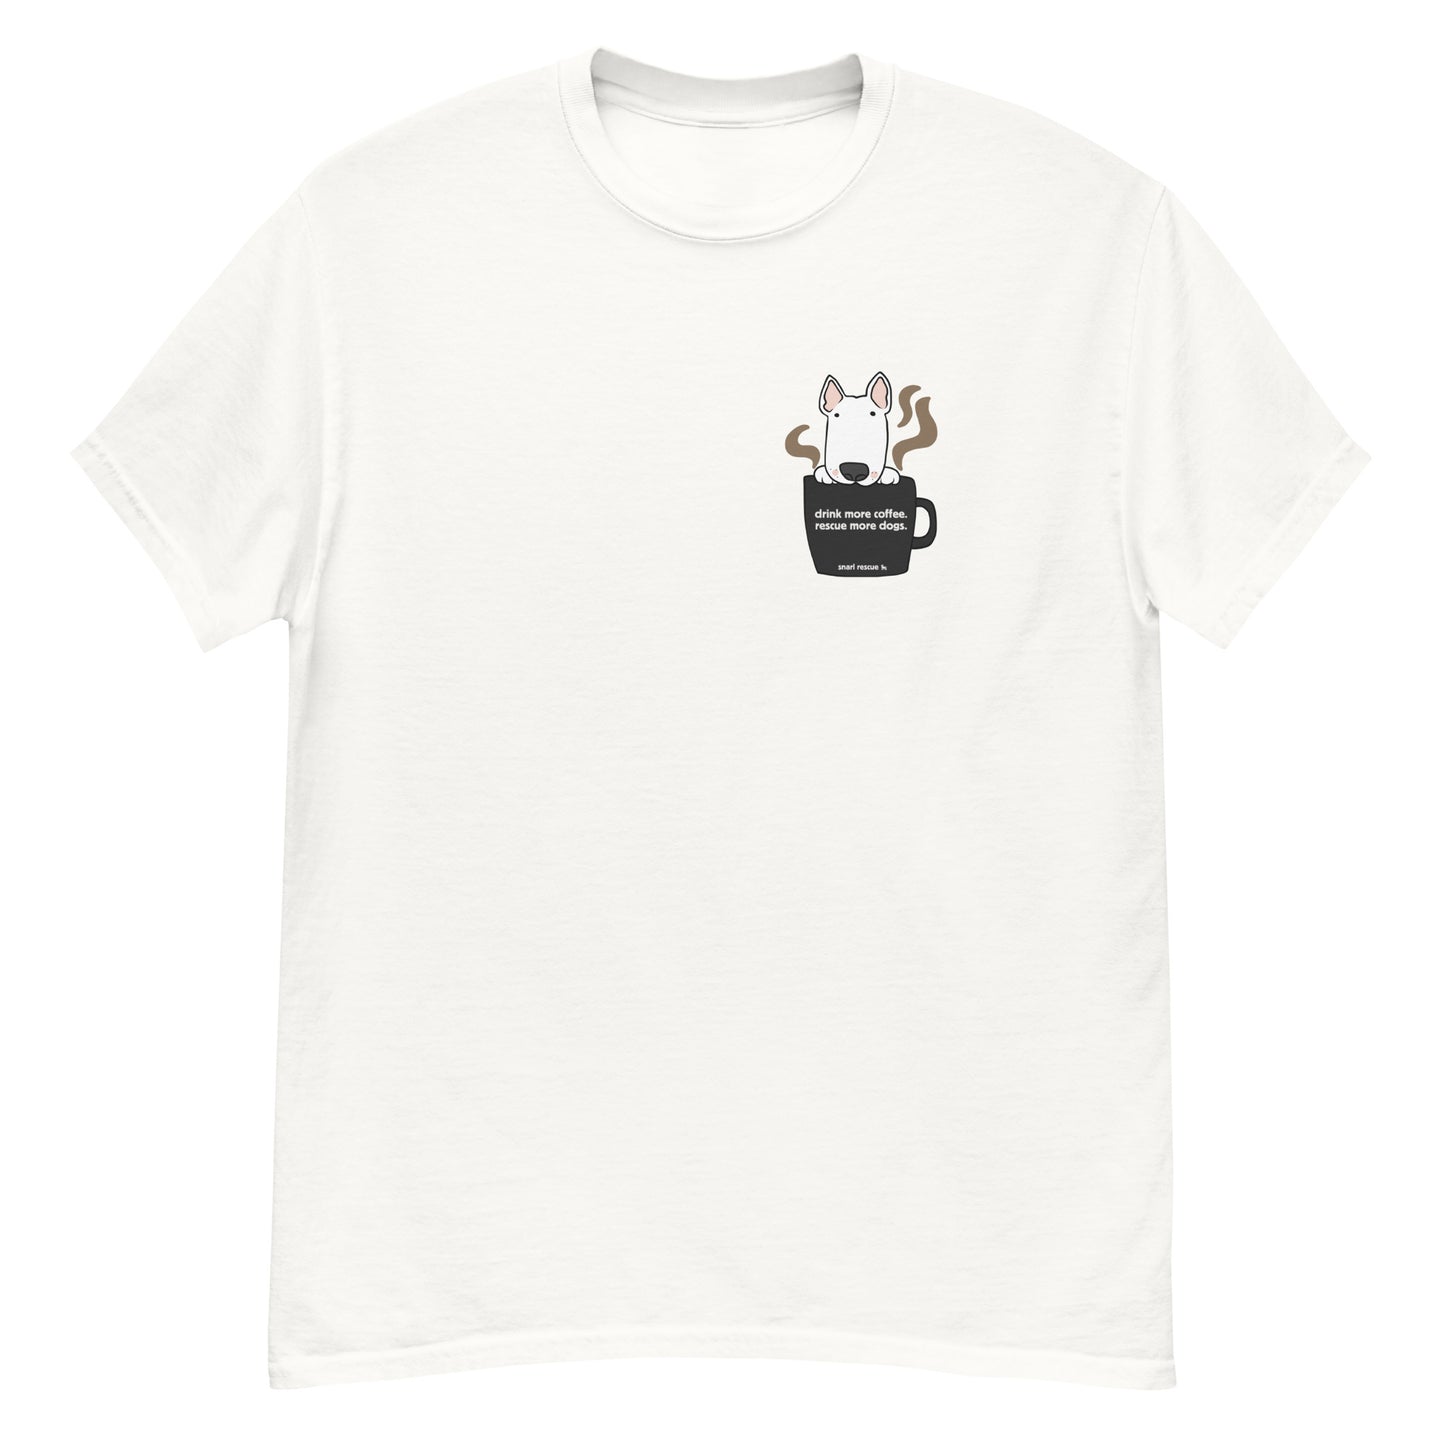 The Pup Cup Tee